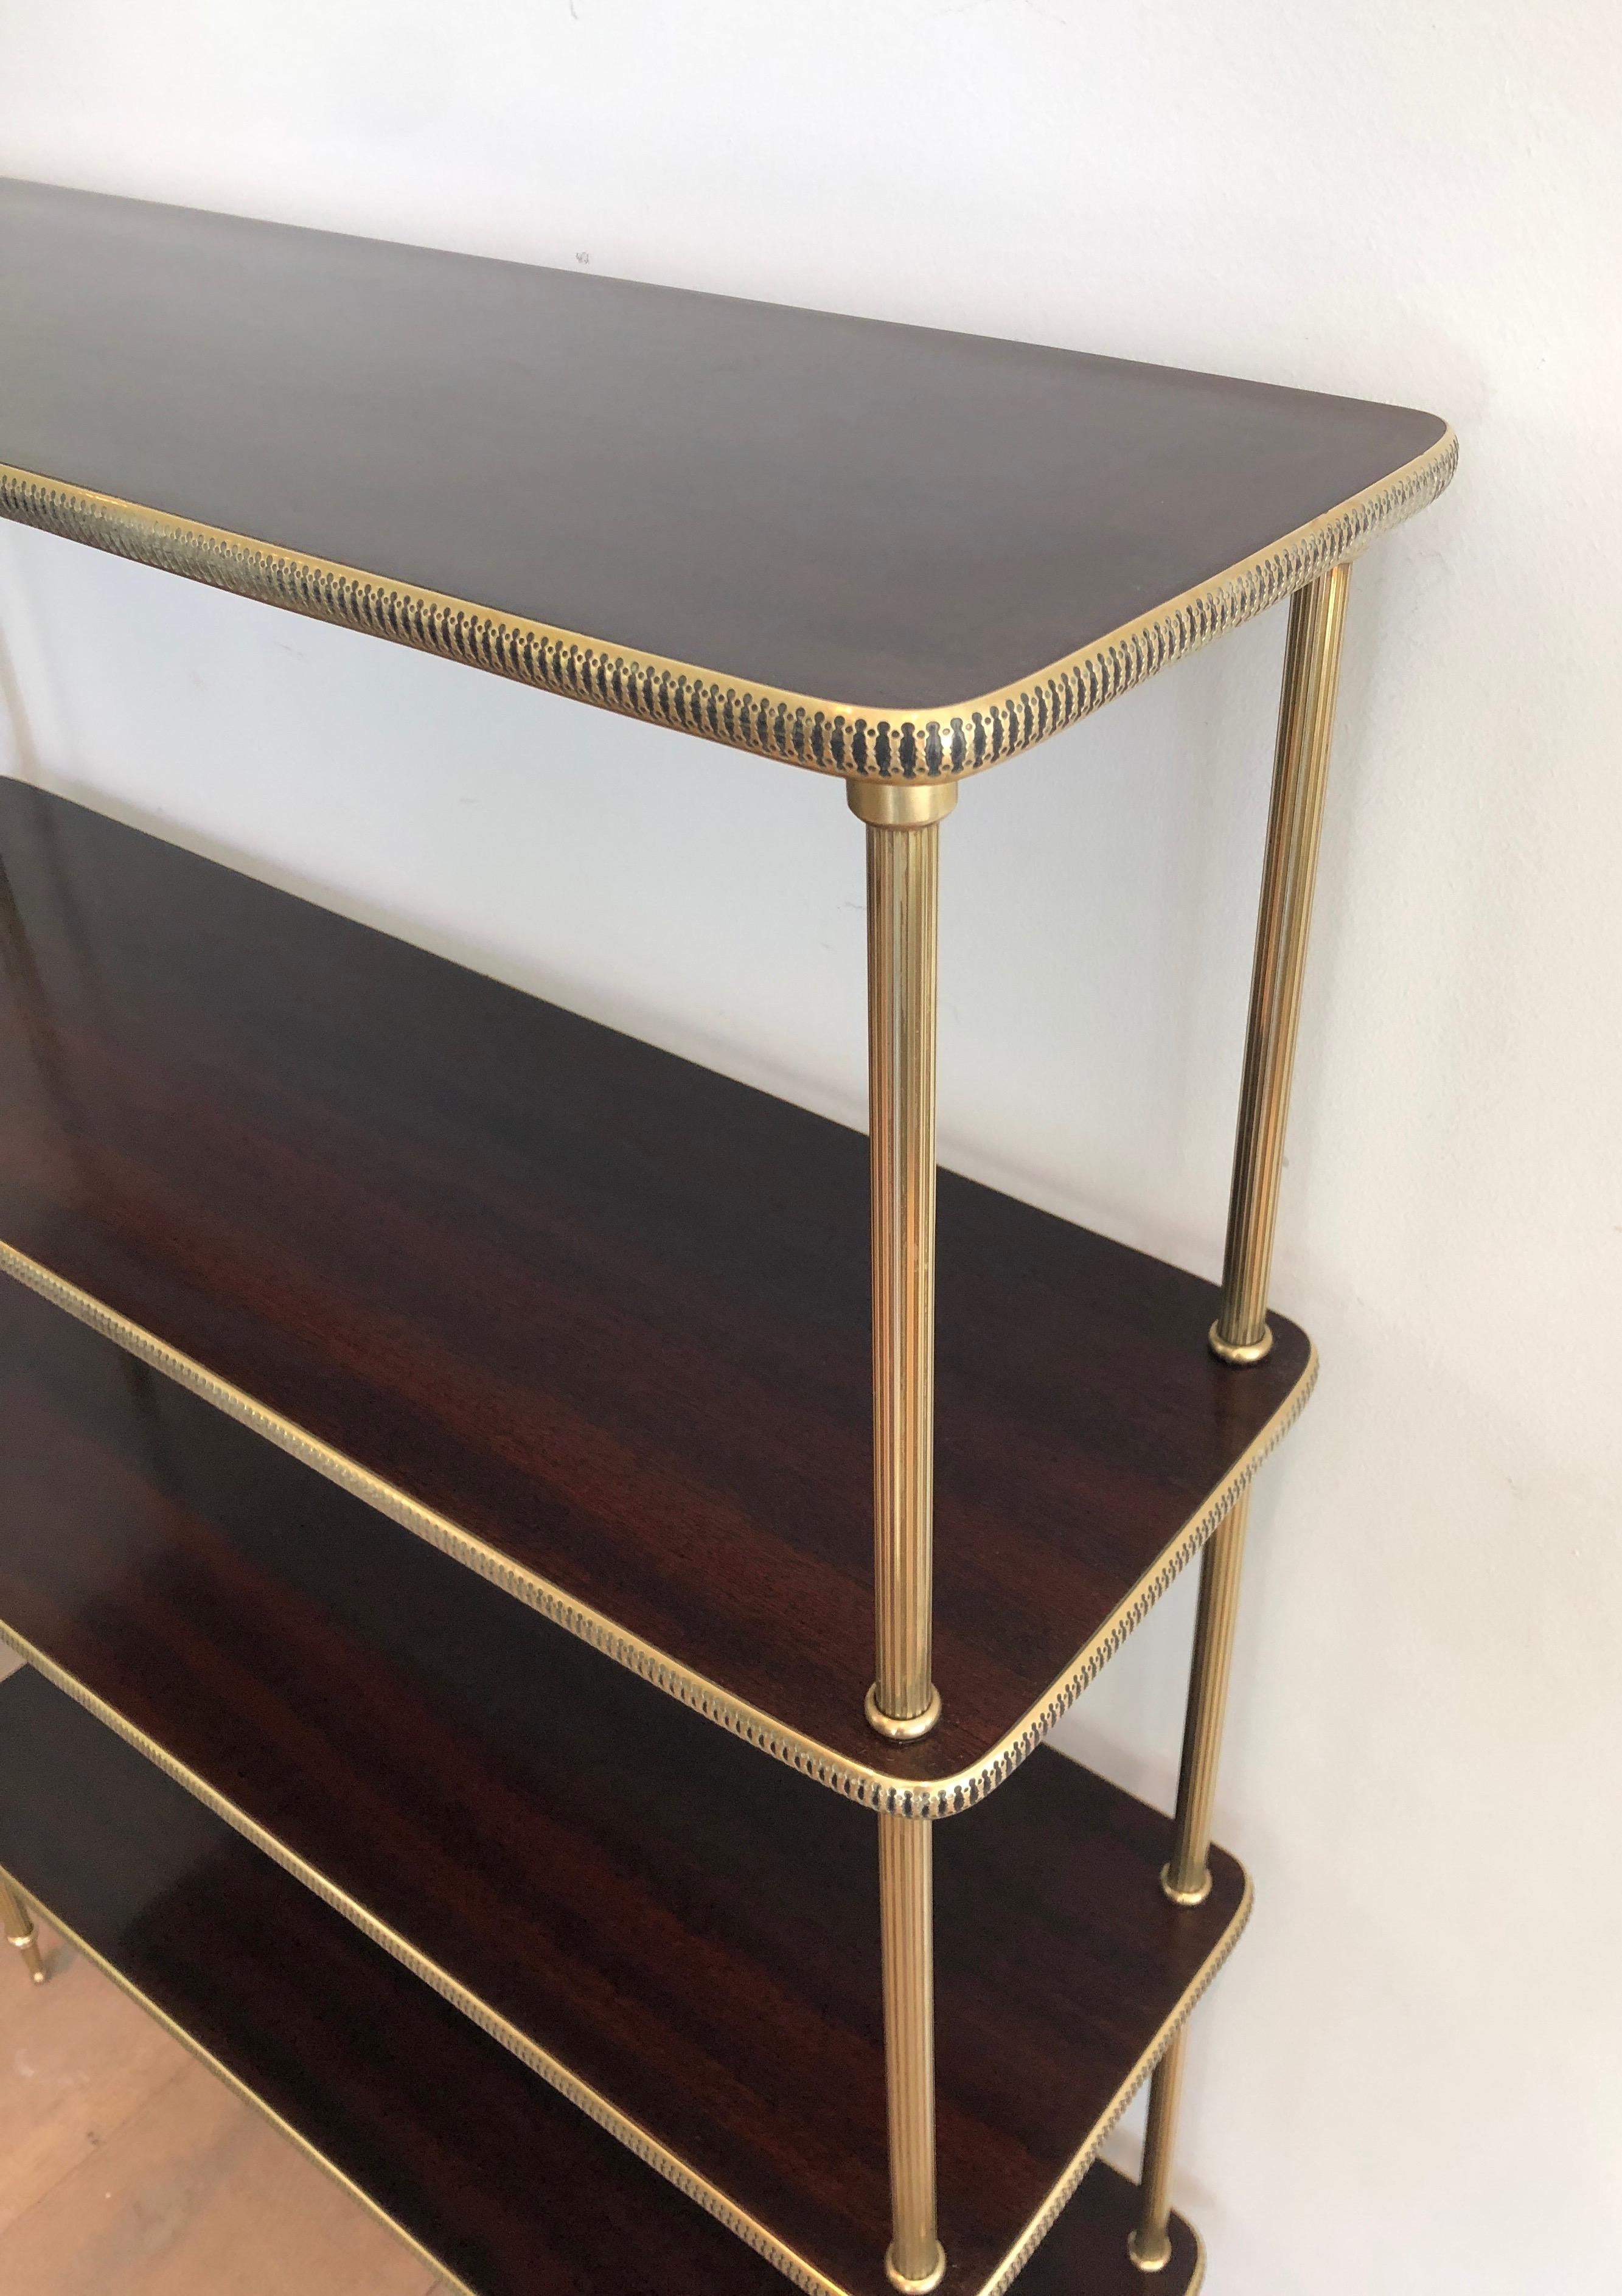 Mid-20th Century Neoclassical Style Mahogany and Brass Shelves Unit, French, Circa 1940